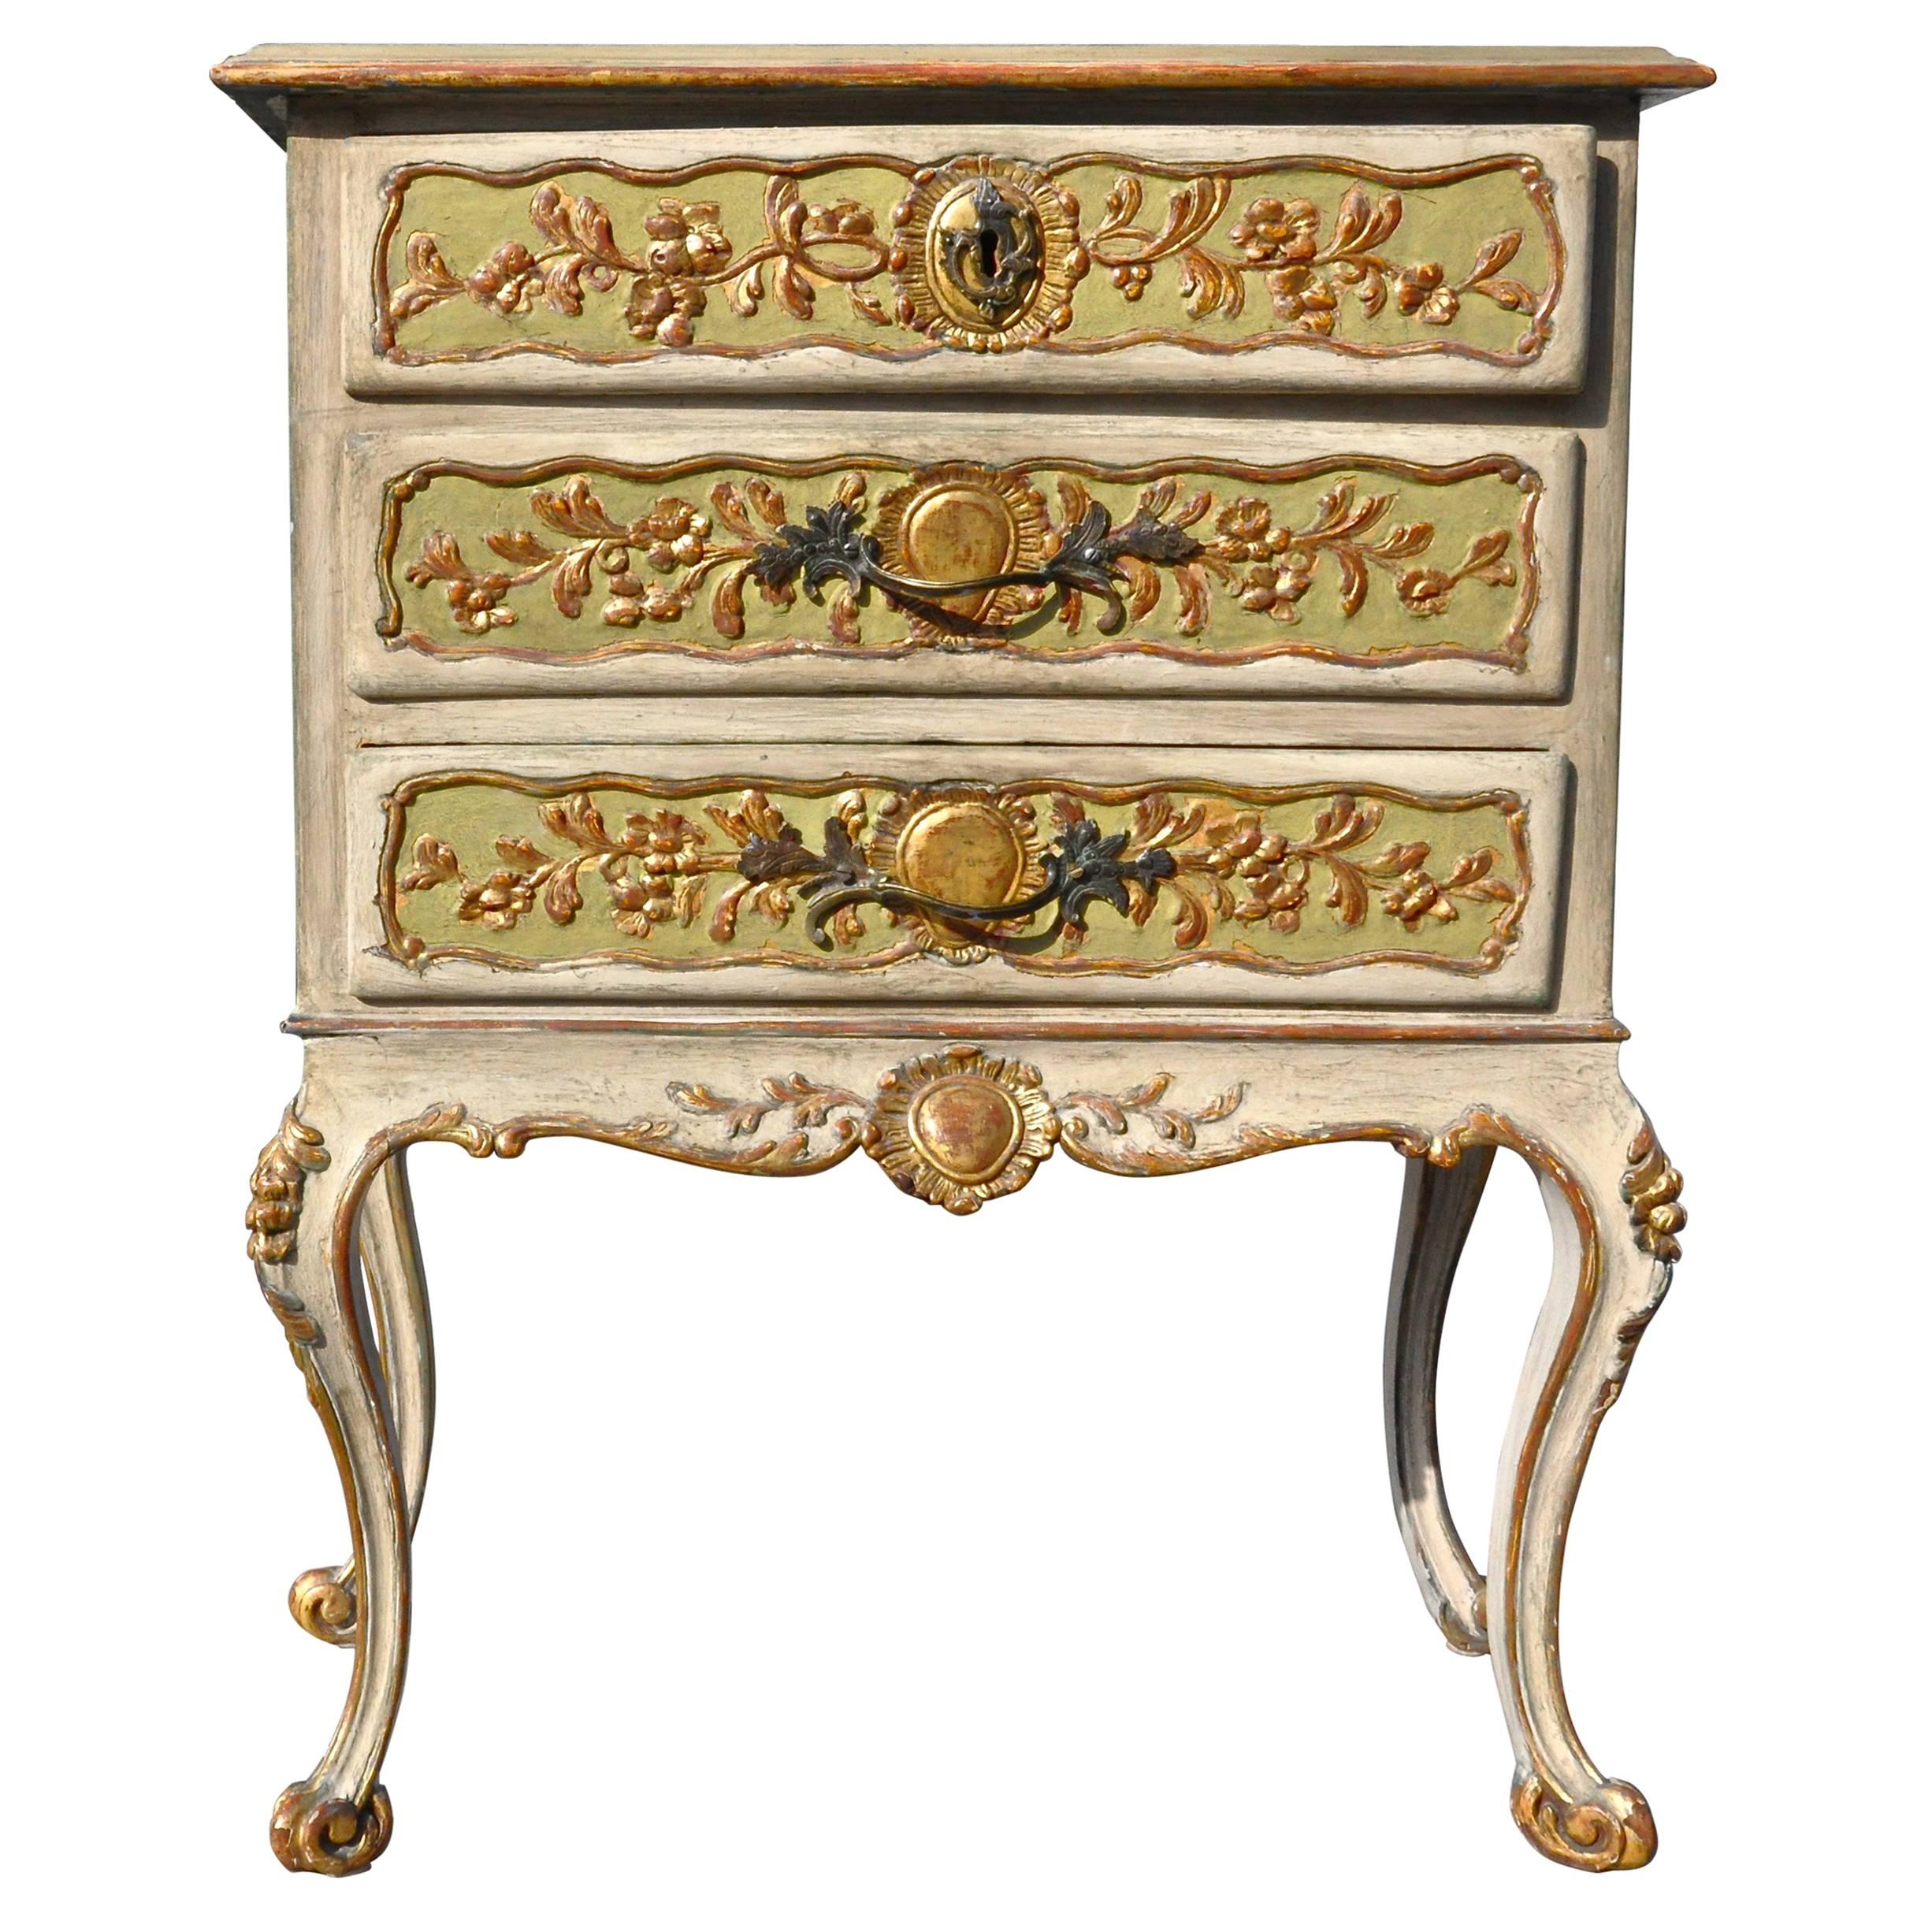 Period German Mid-18th Century Neoclassical Painted Commode